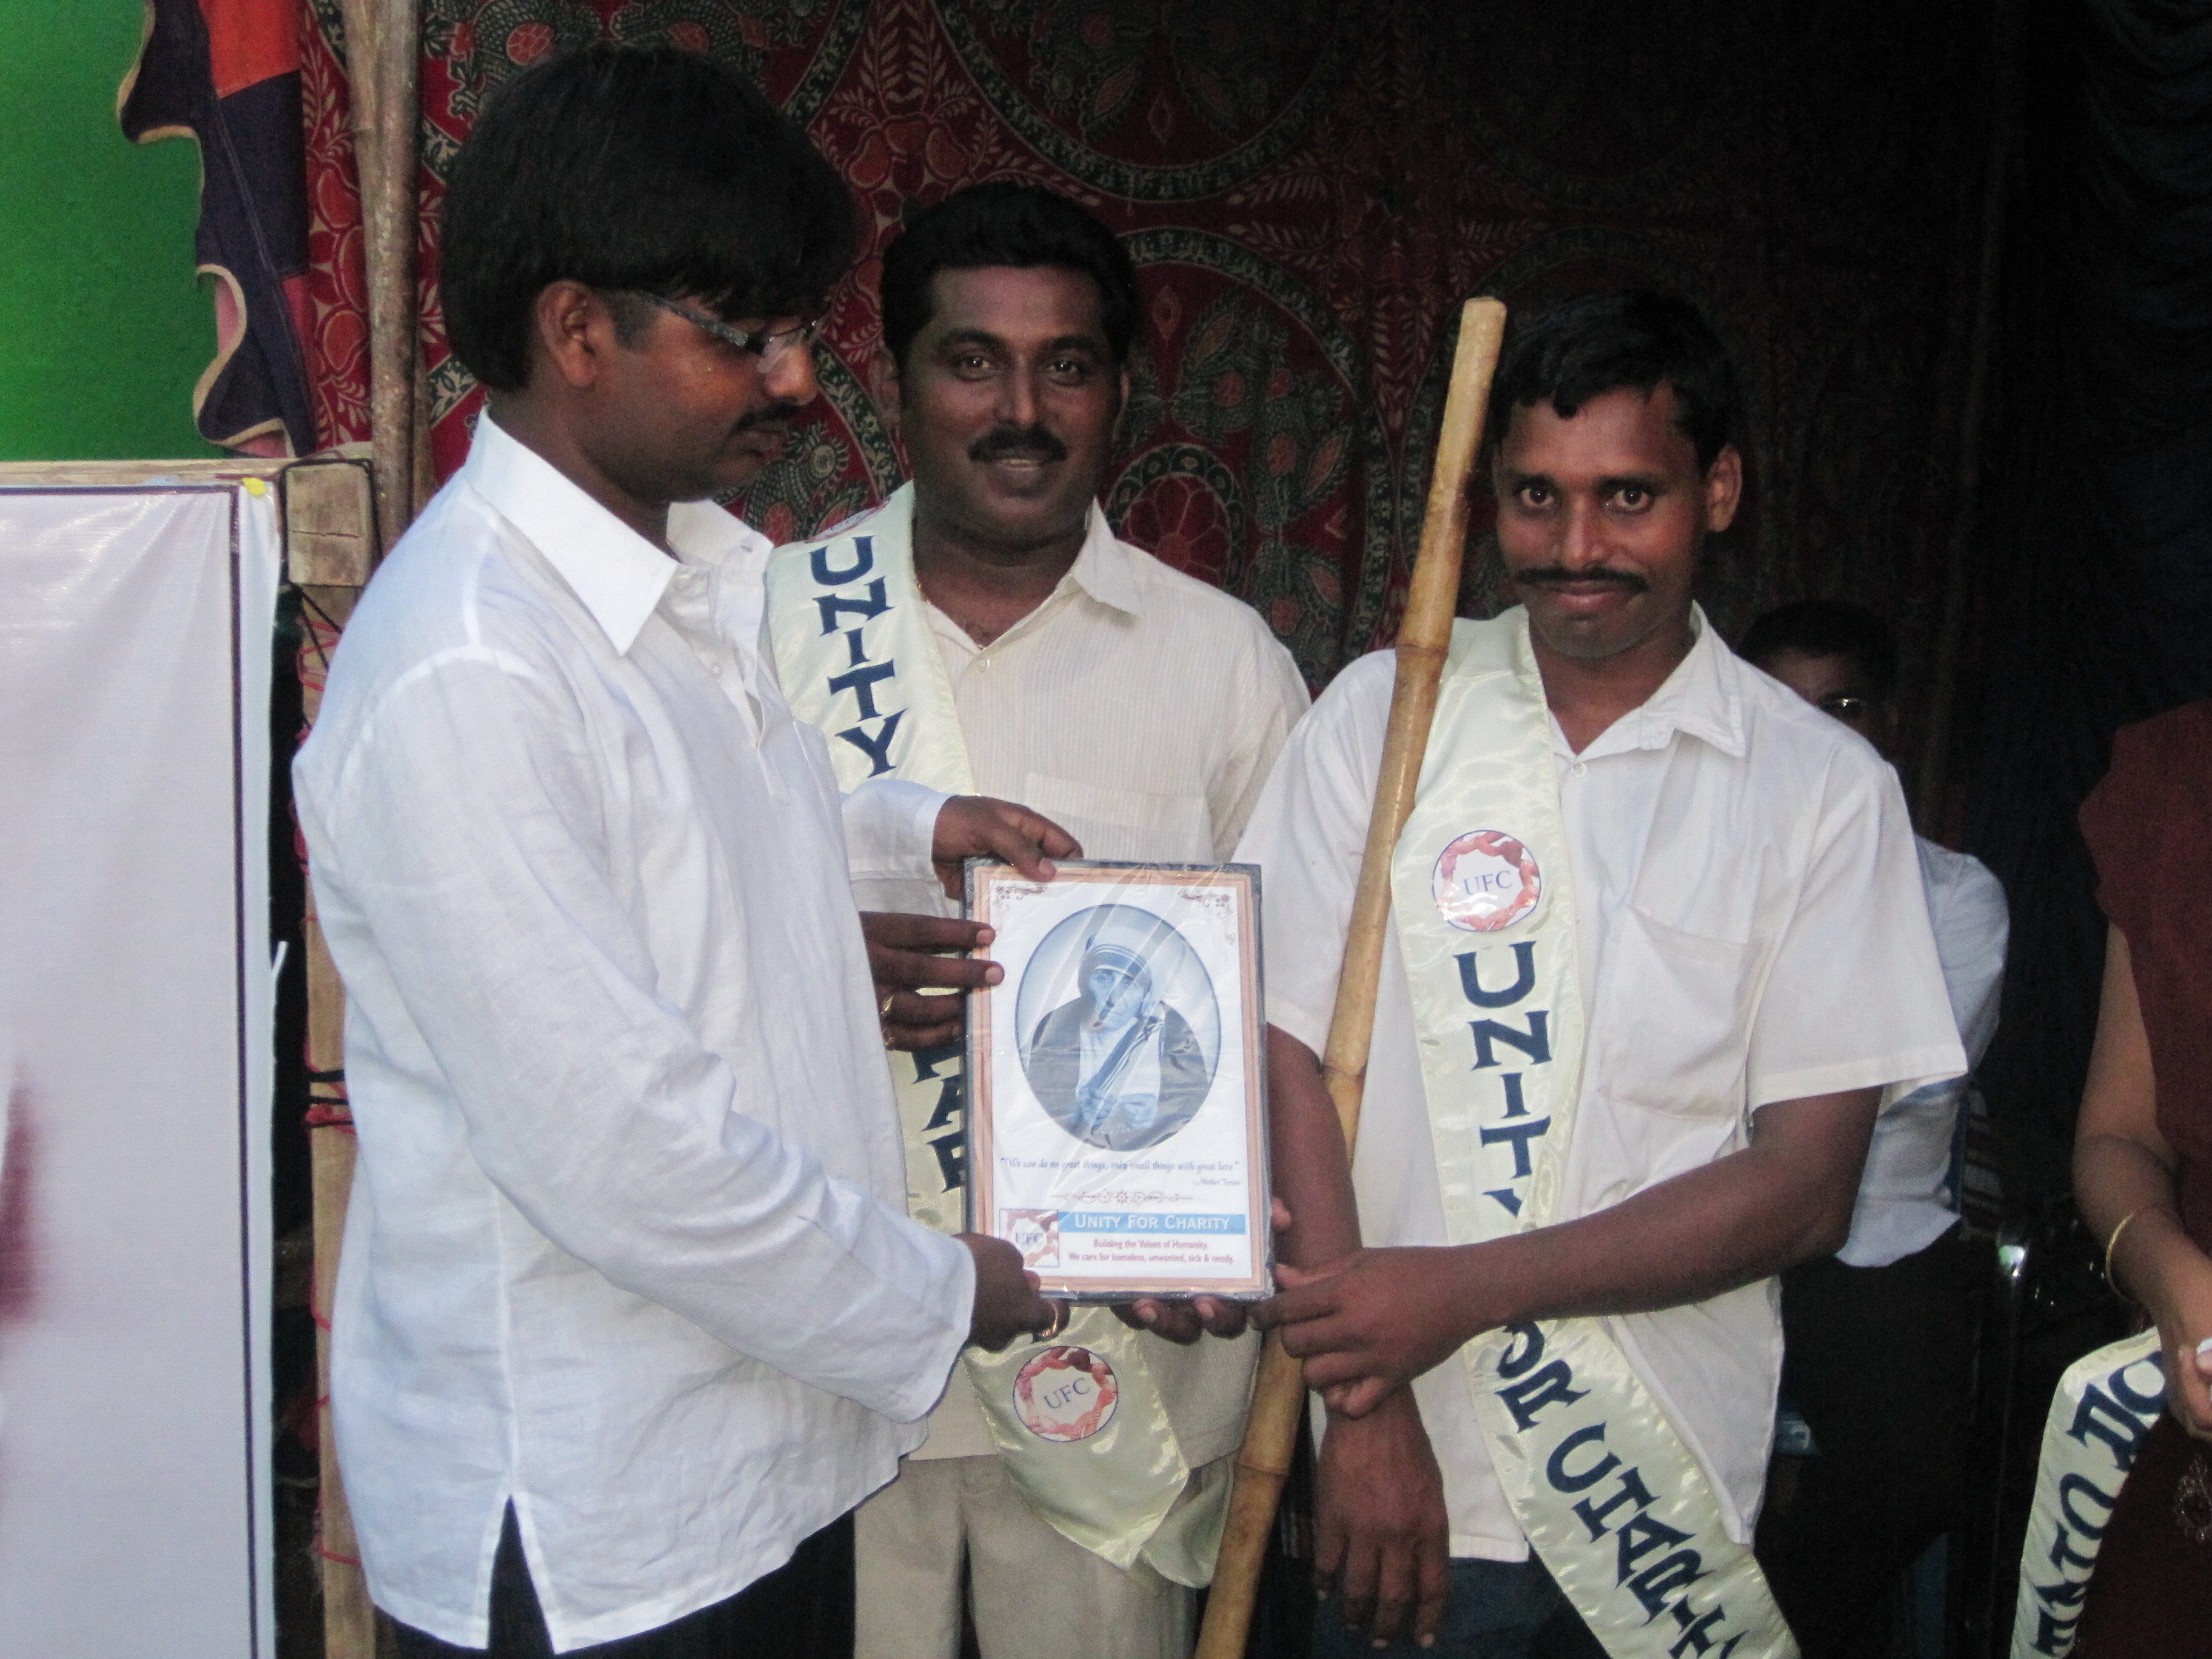 Awarding the Members for their good work